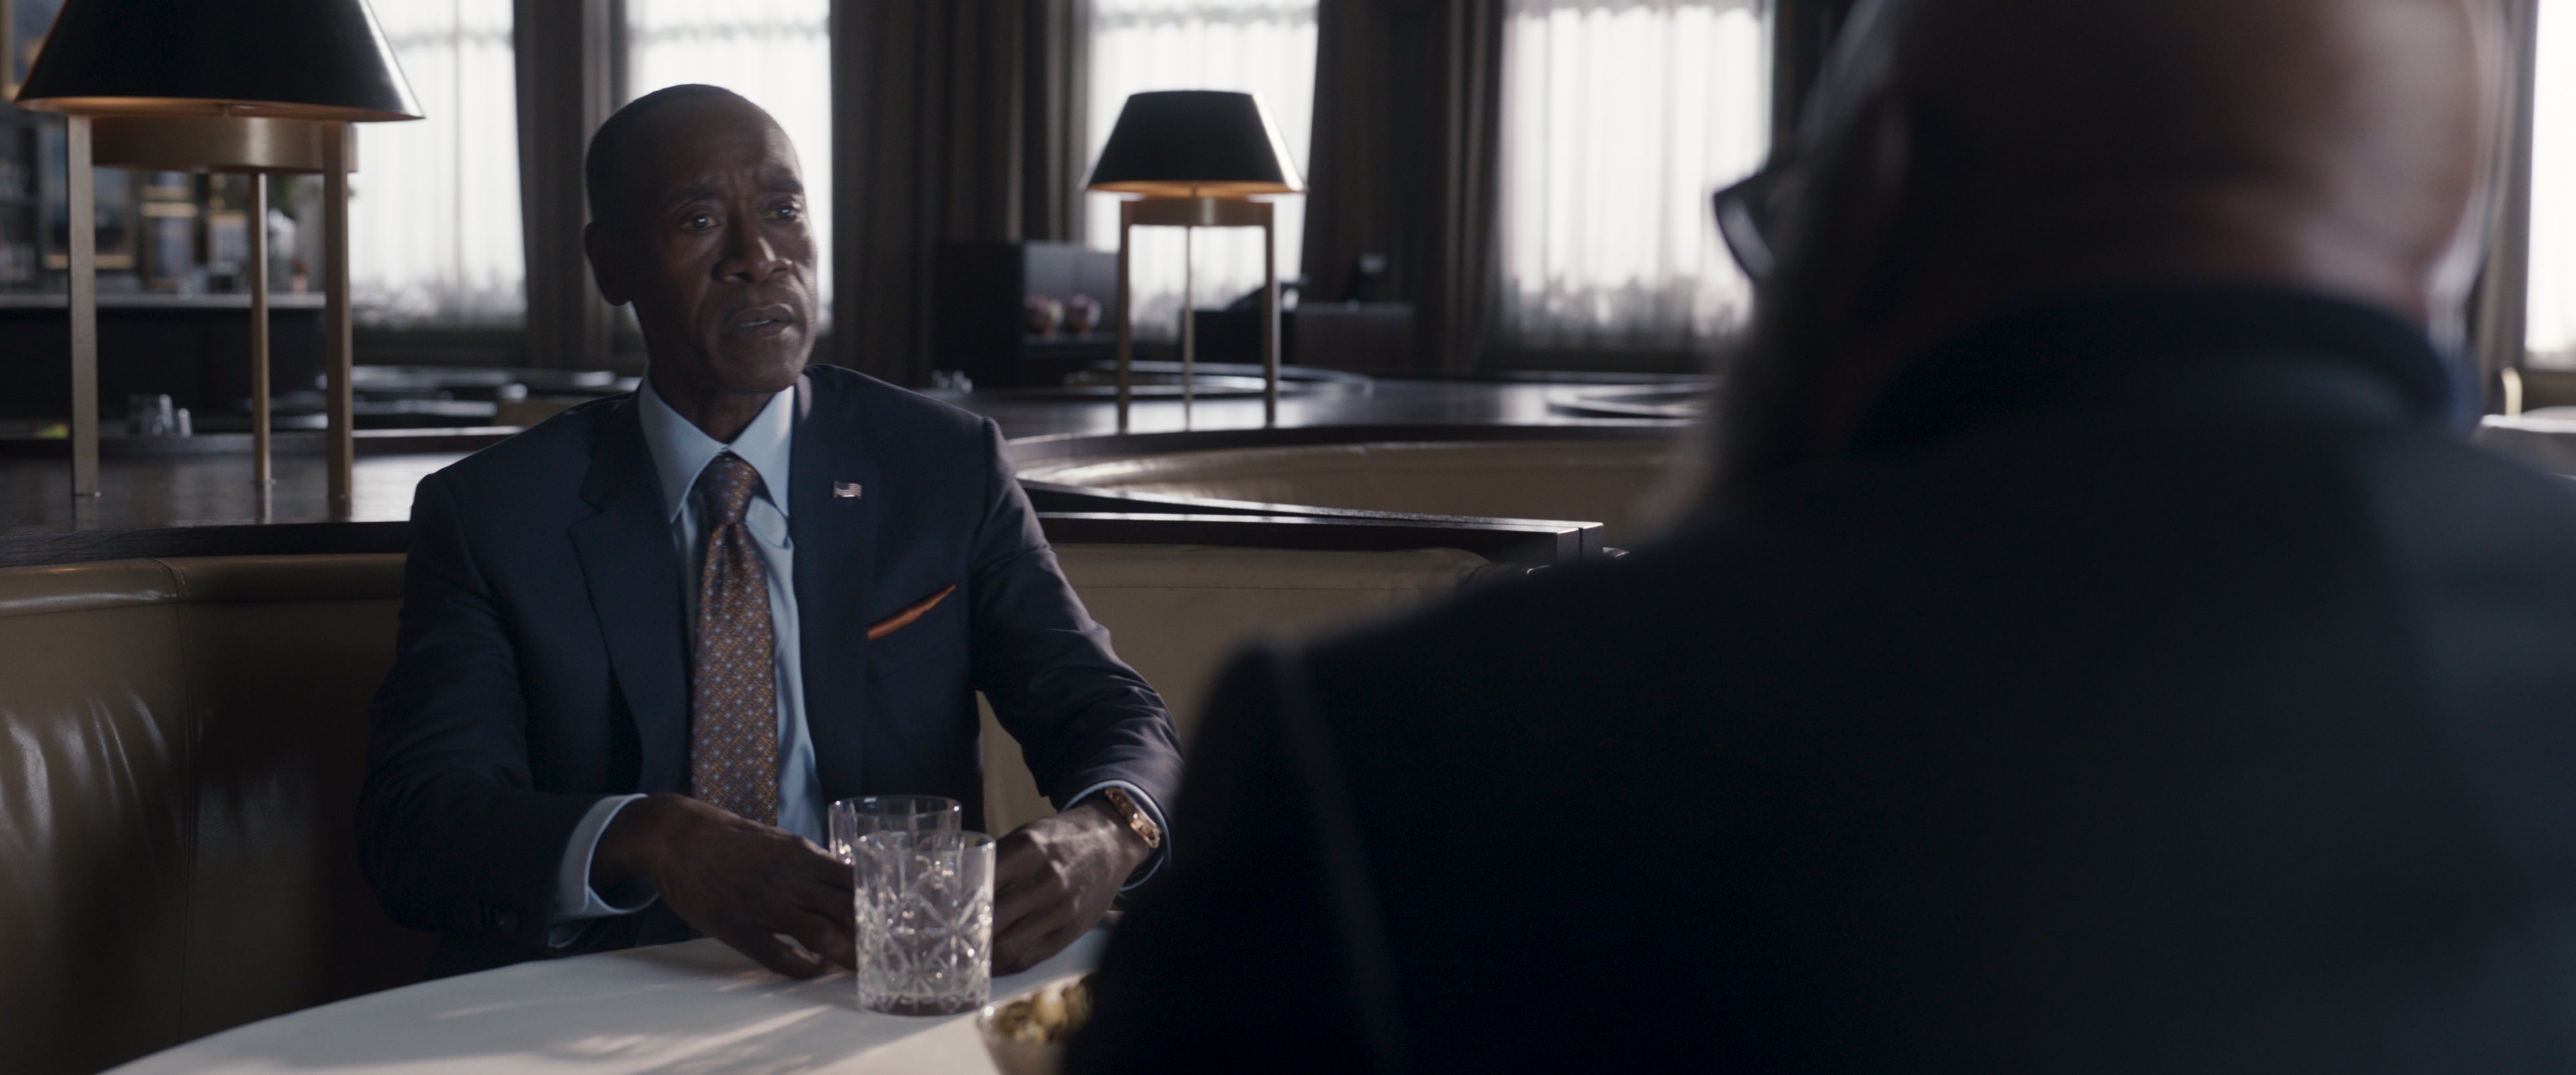 Still image of Rhodey wearing a suit and sitting at a white tableclothed table facing Nick Fury